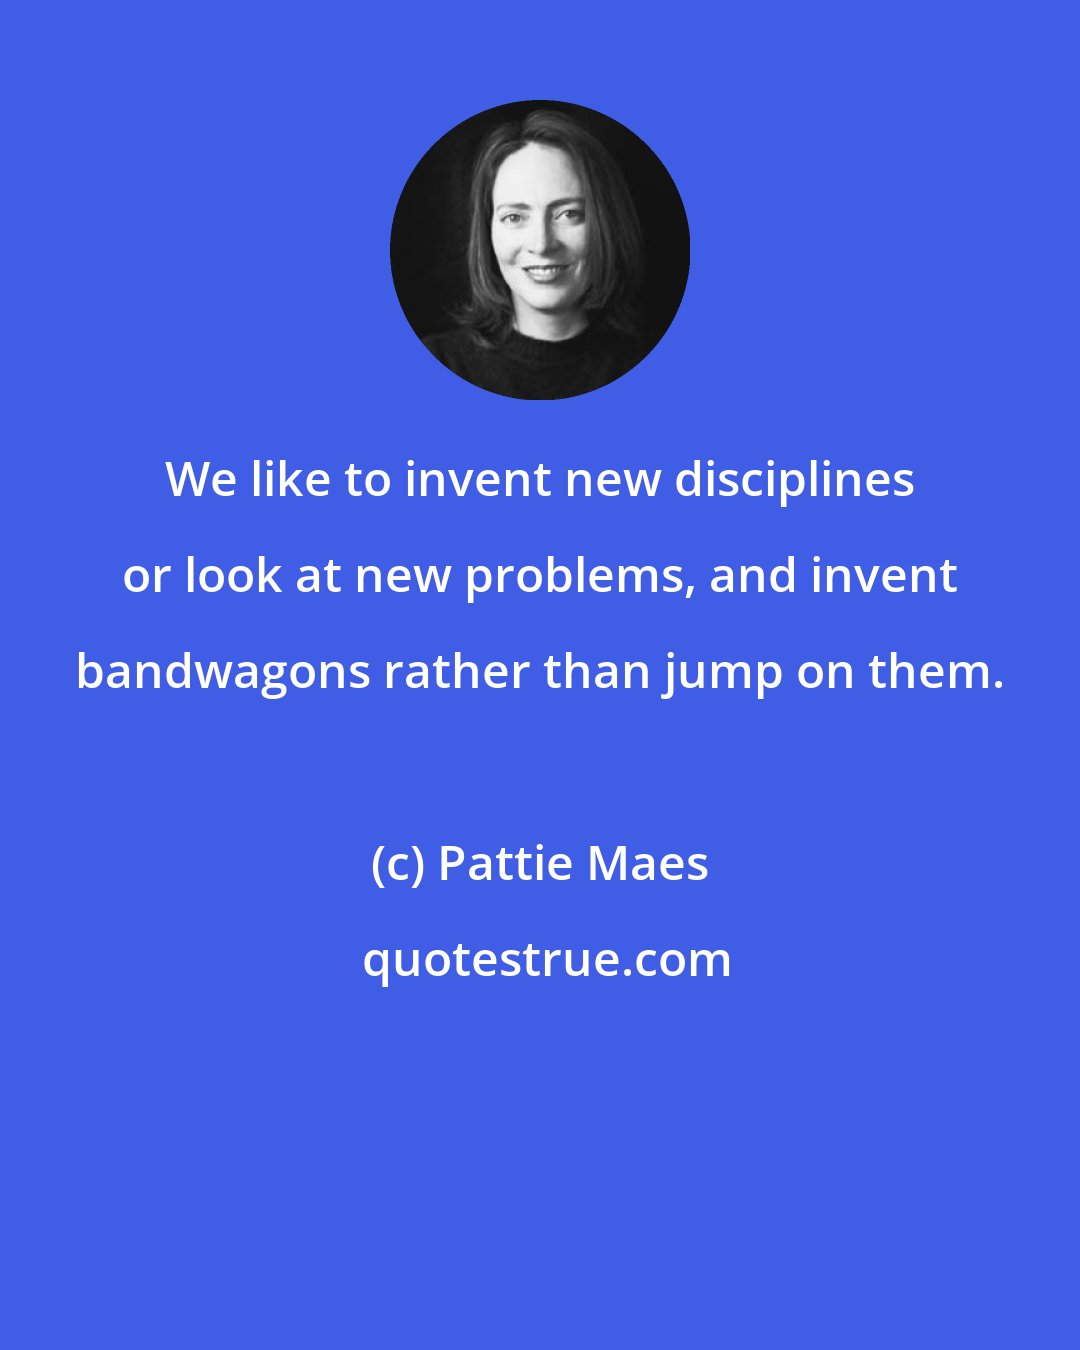 Pattie Maes: We like to invent new disciplines or look at new problems, and invent bandwagons rather than jump on them.